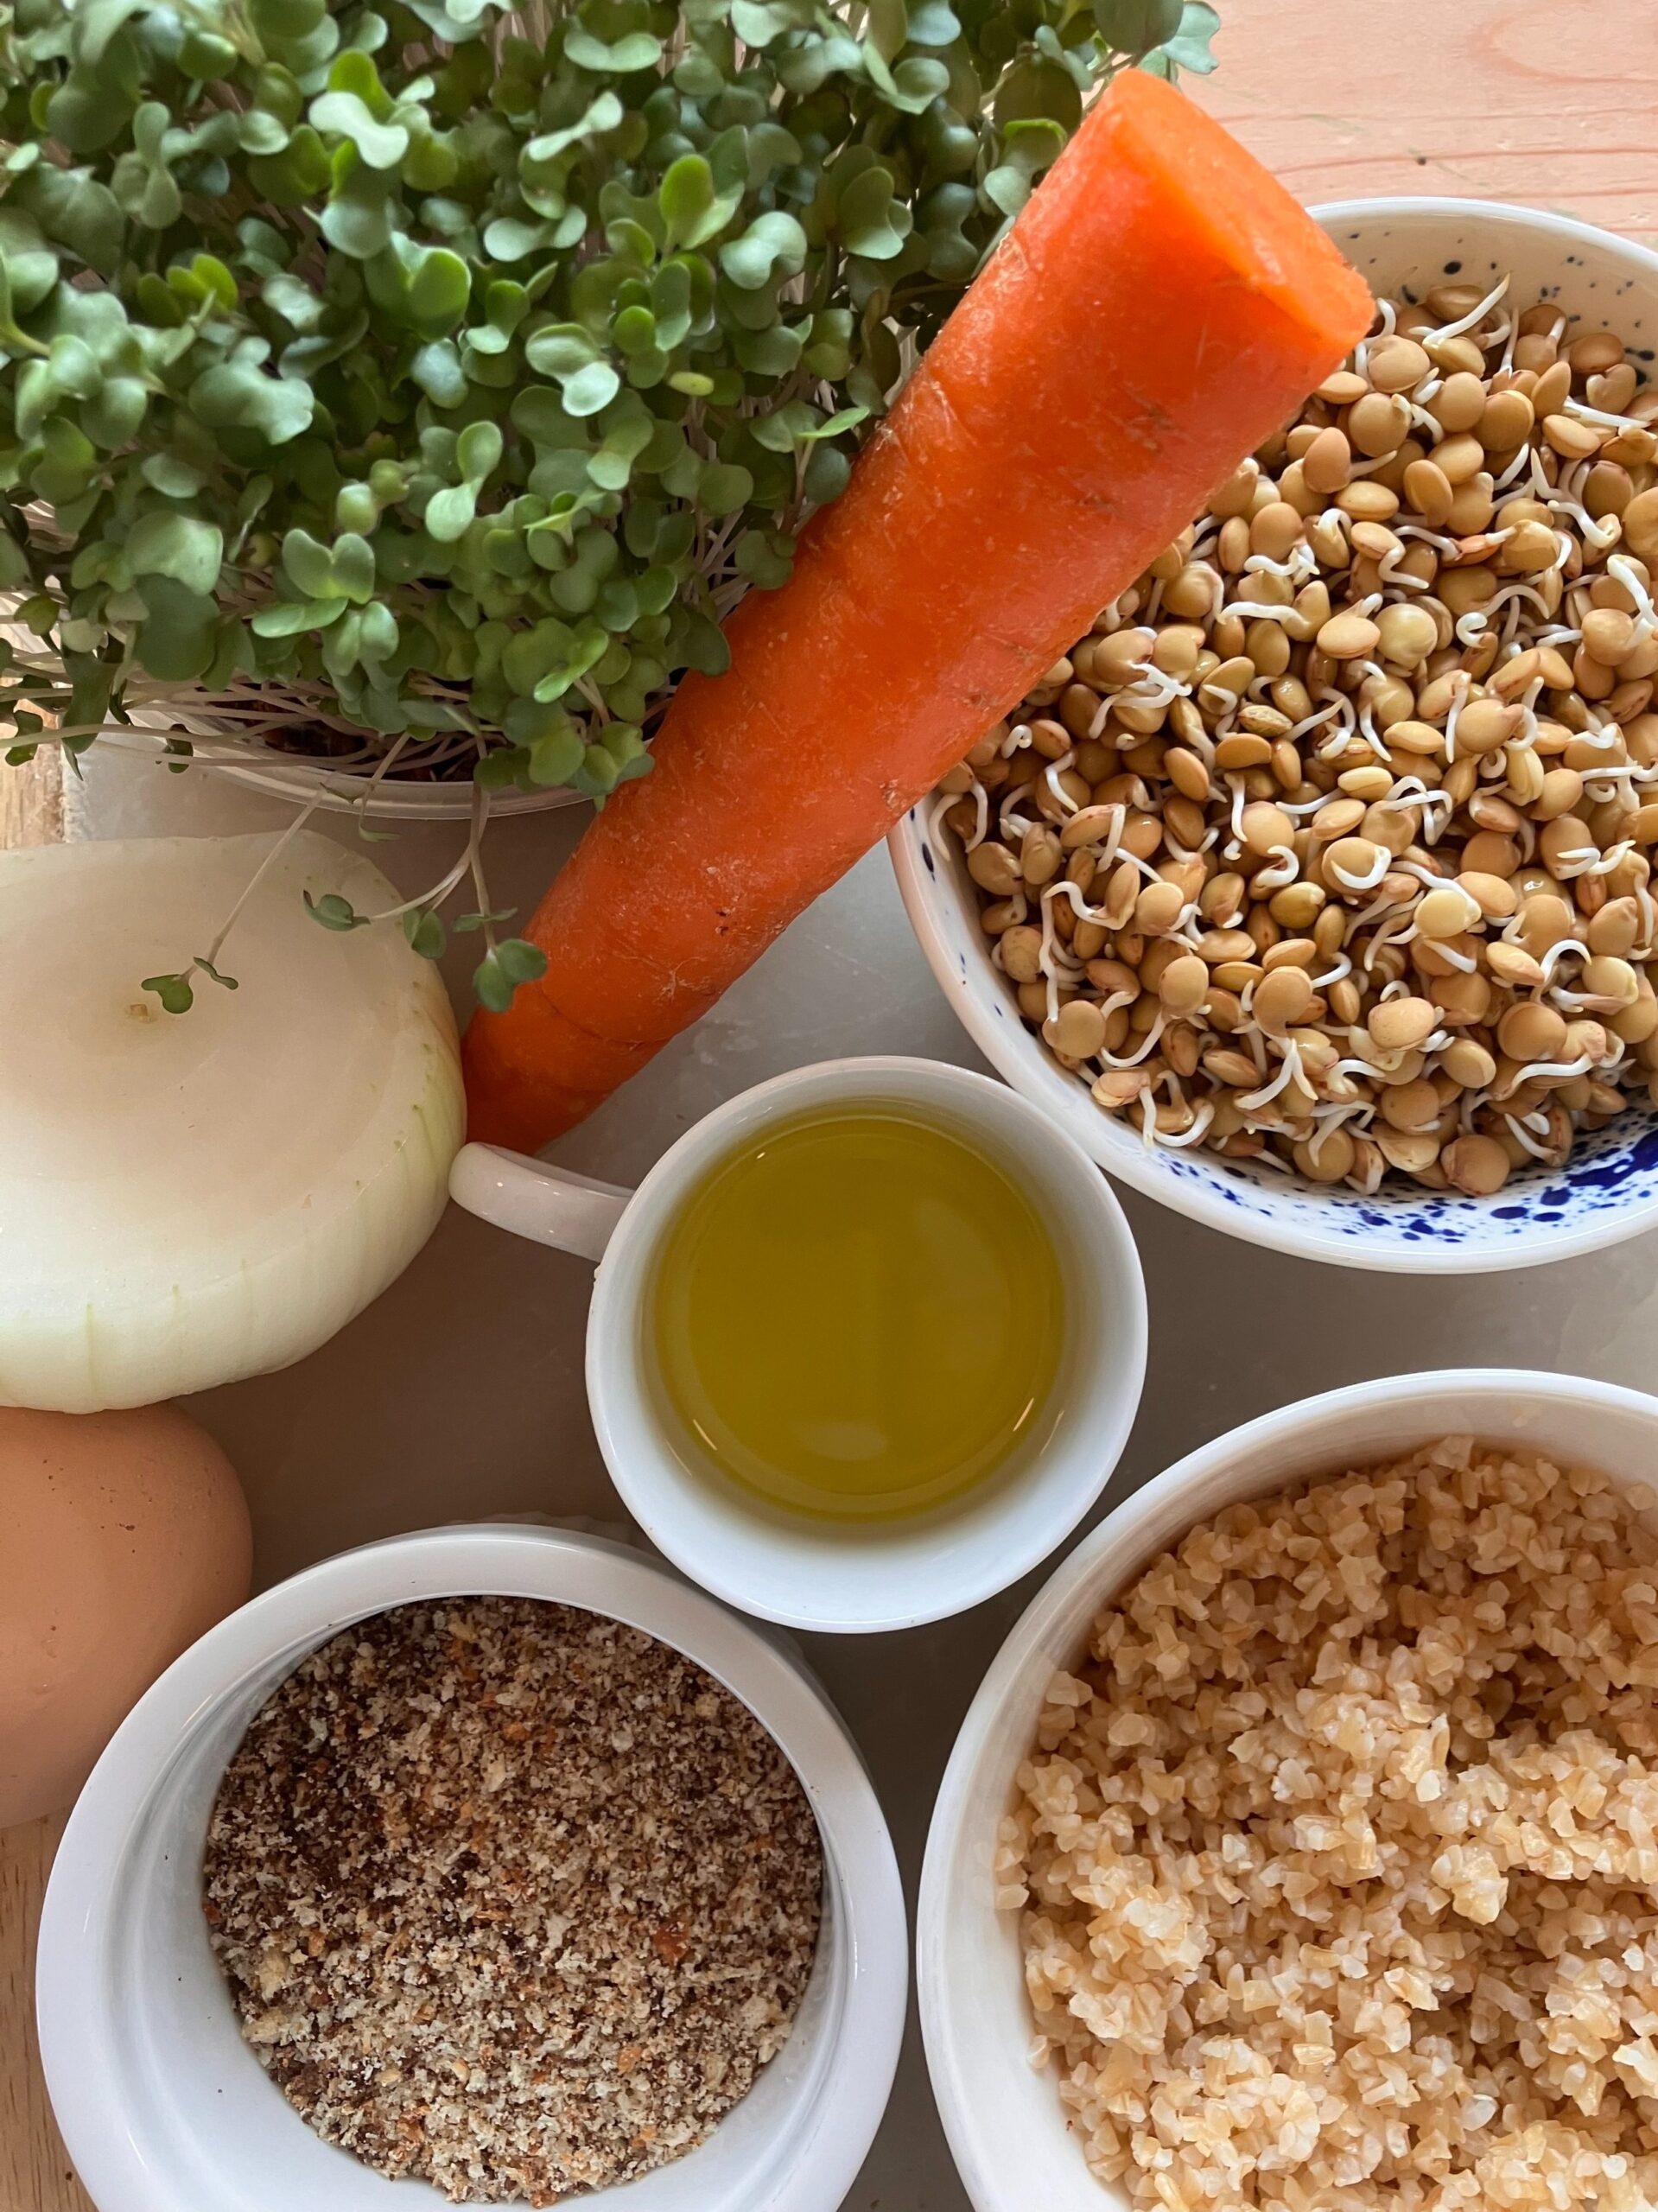 Bulger, bread crumbs, olive oil, egg, carrot, onion, sprouted lentils, microgreens